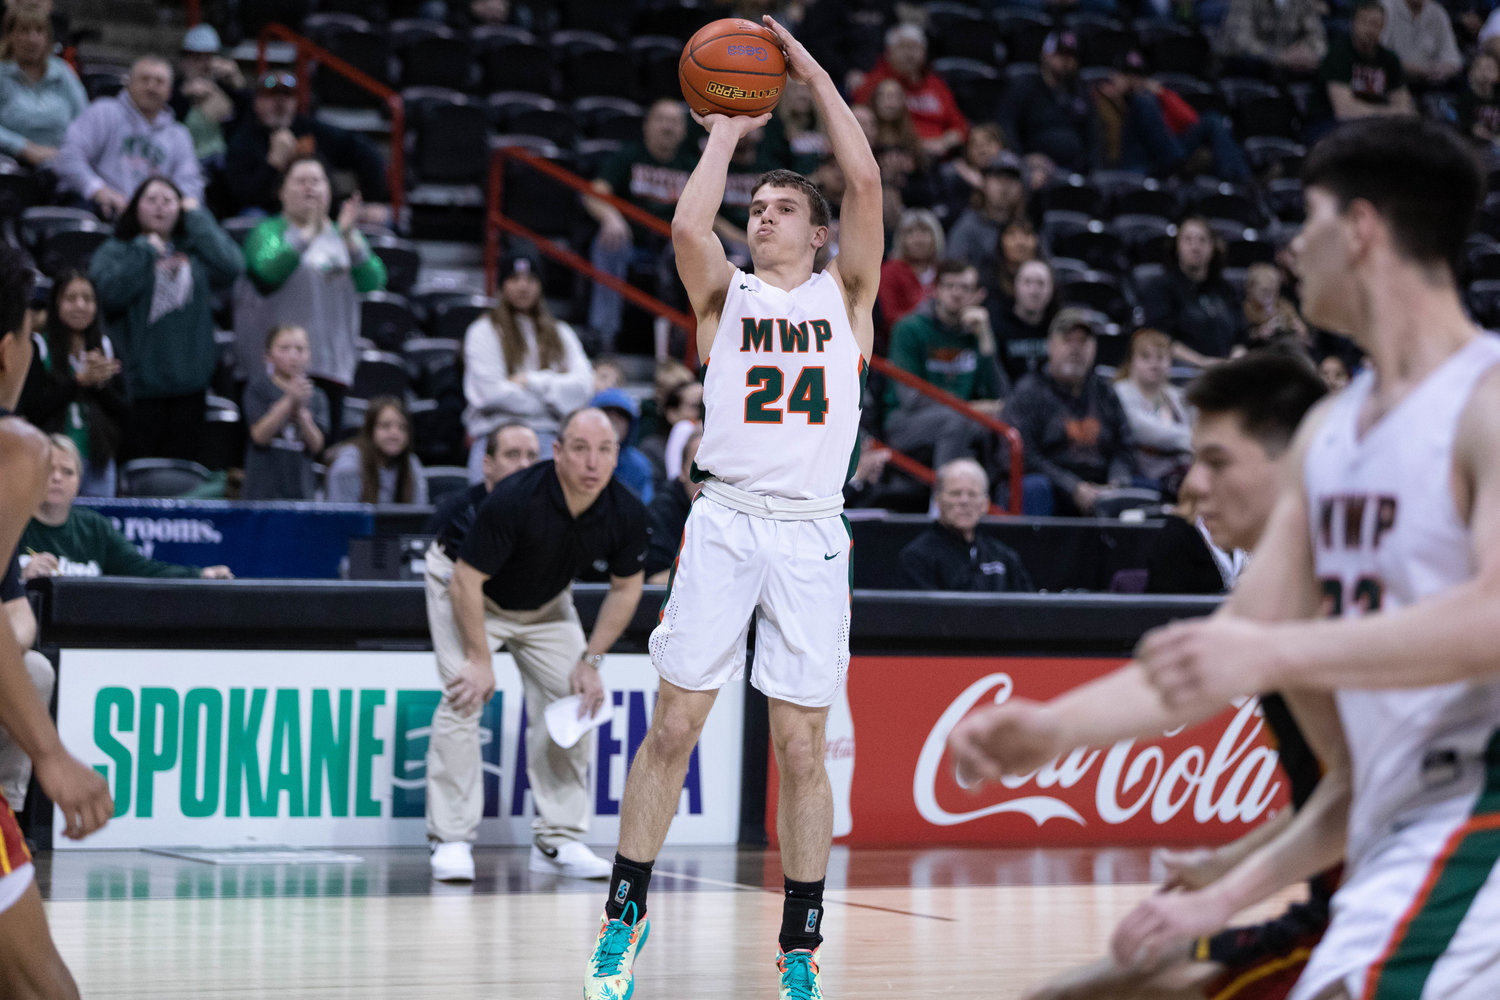 Morton-White Pass guard Carter Dantinne takes a 3-pointer against Lake Roosevelt in the 2B state fourth-place game at Spokane Arena March 3.